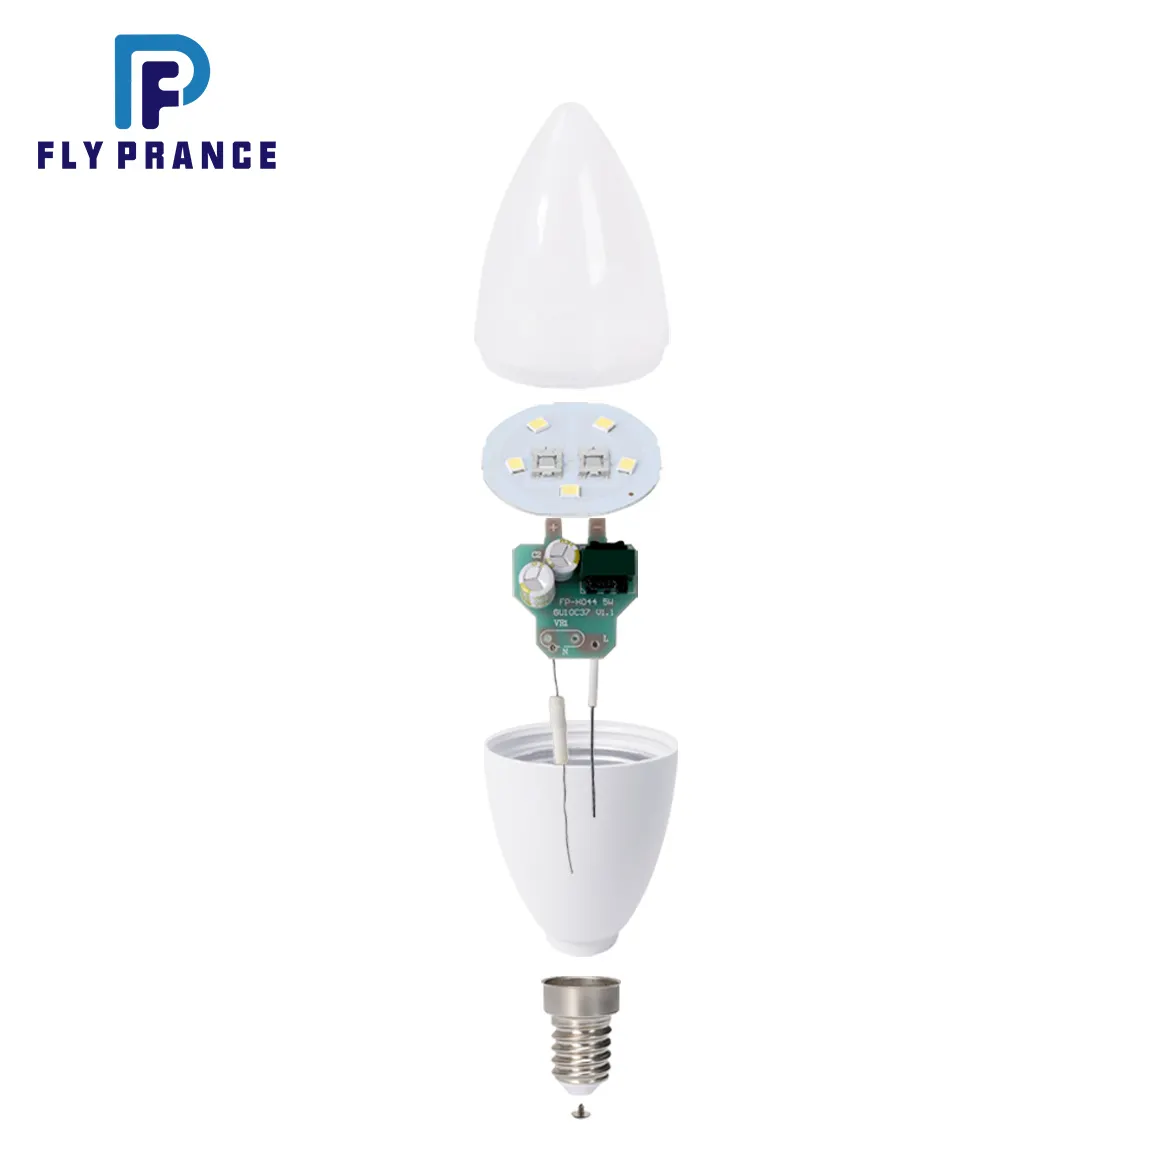 China factory Special Hot Selling light bulb Fly Prance E14 3000k-6500k high brightness Energy Saving LED Assembly Complet Blub